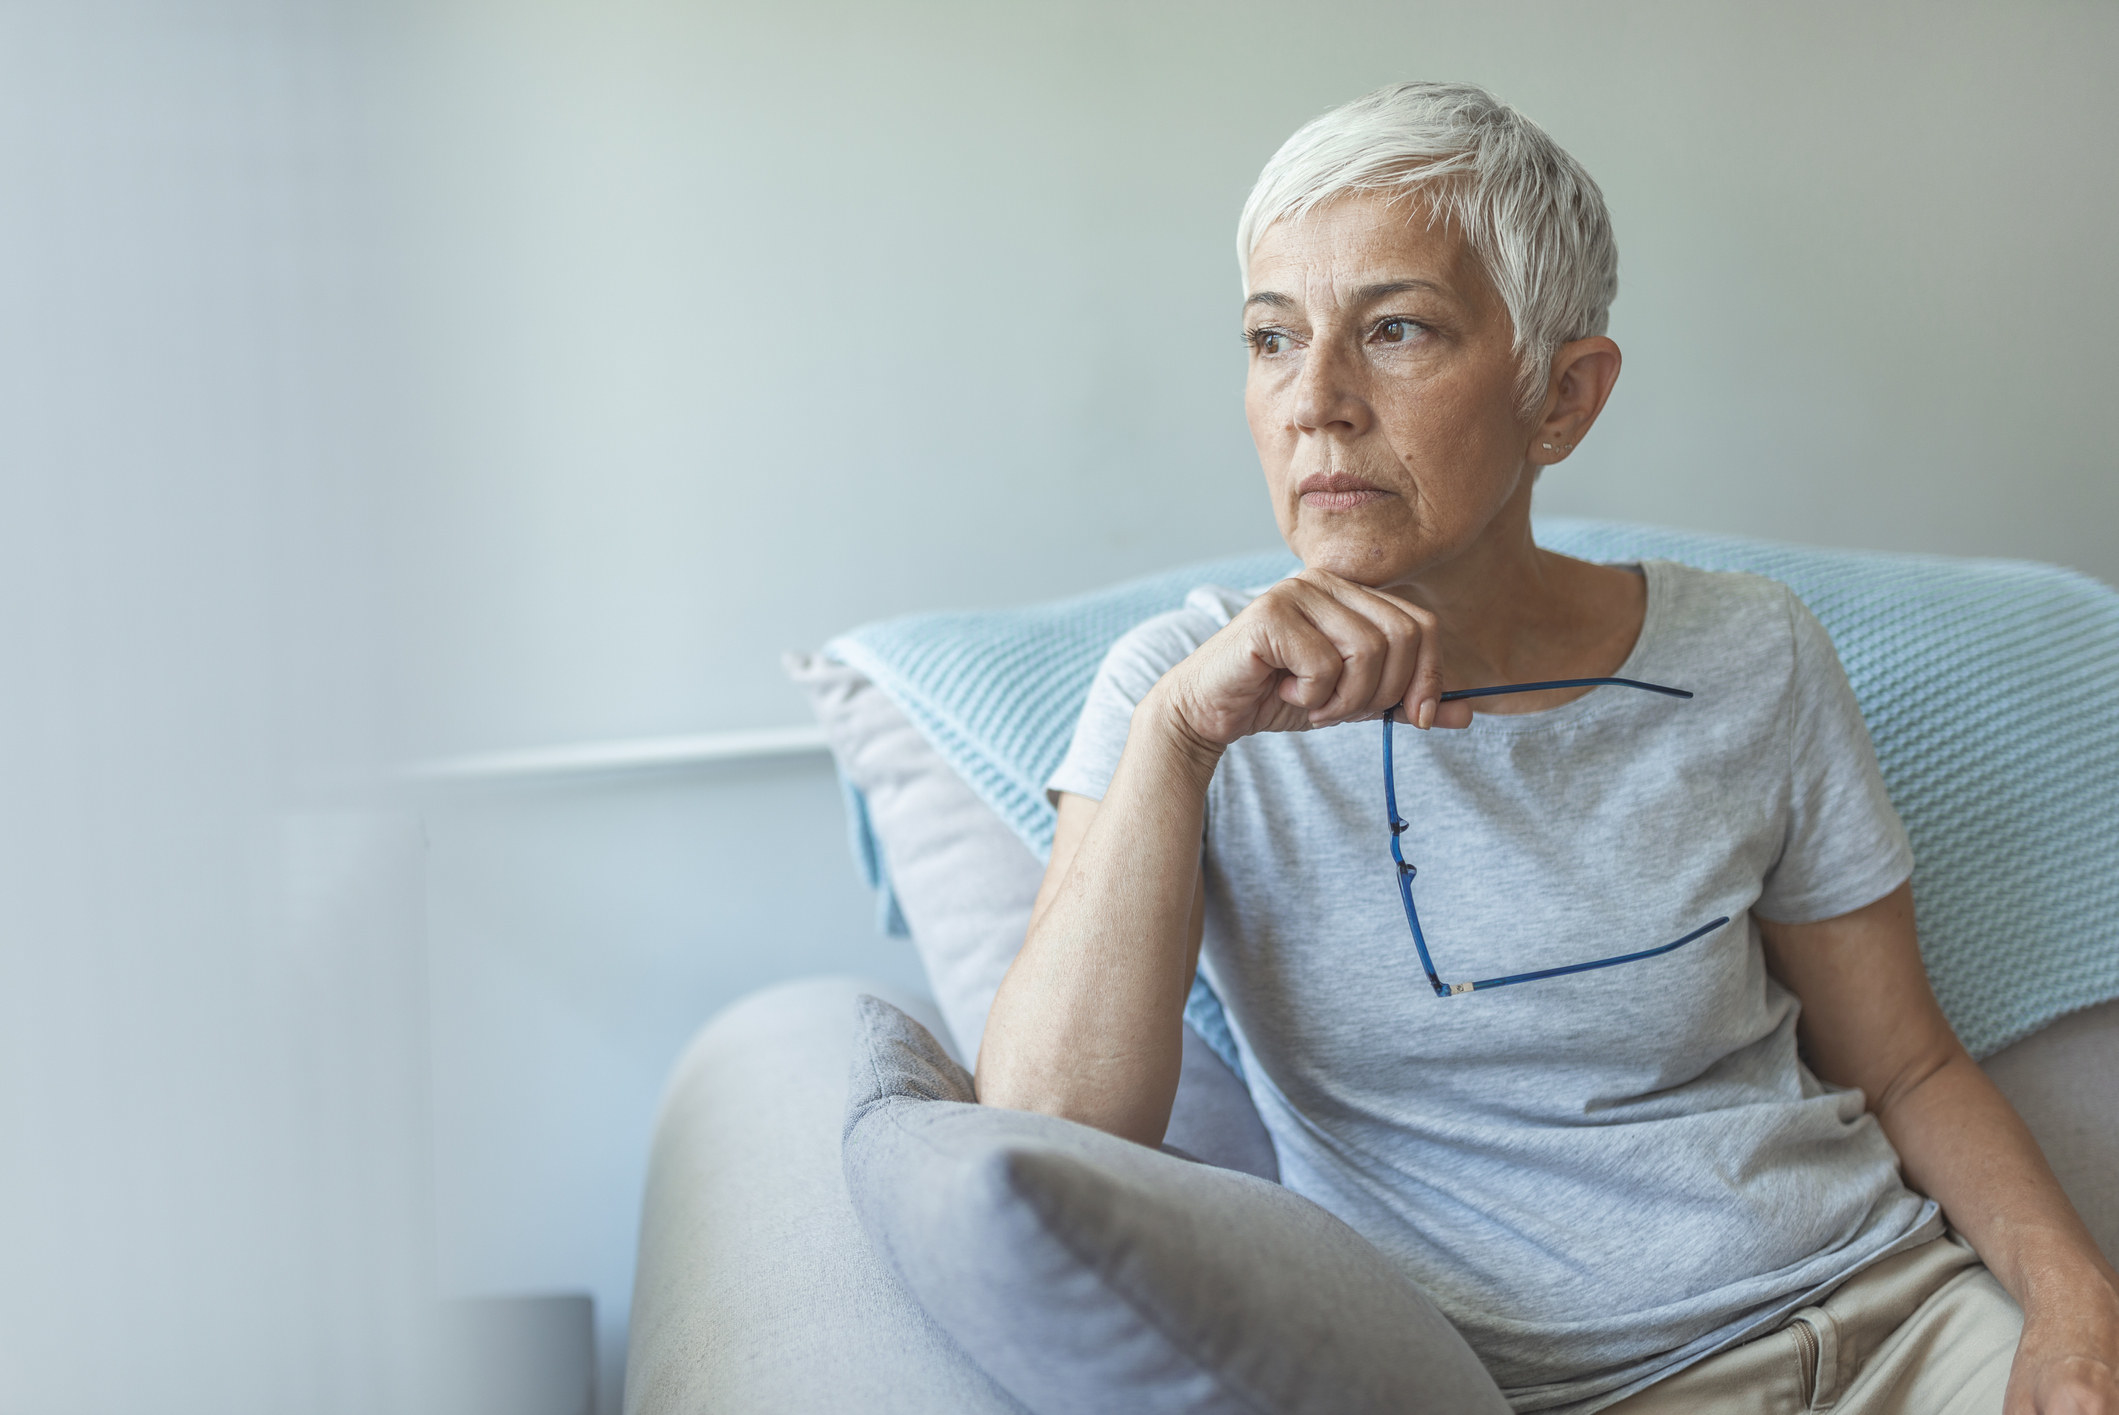 An older woman sitting on a couch and looking thoughtful